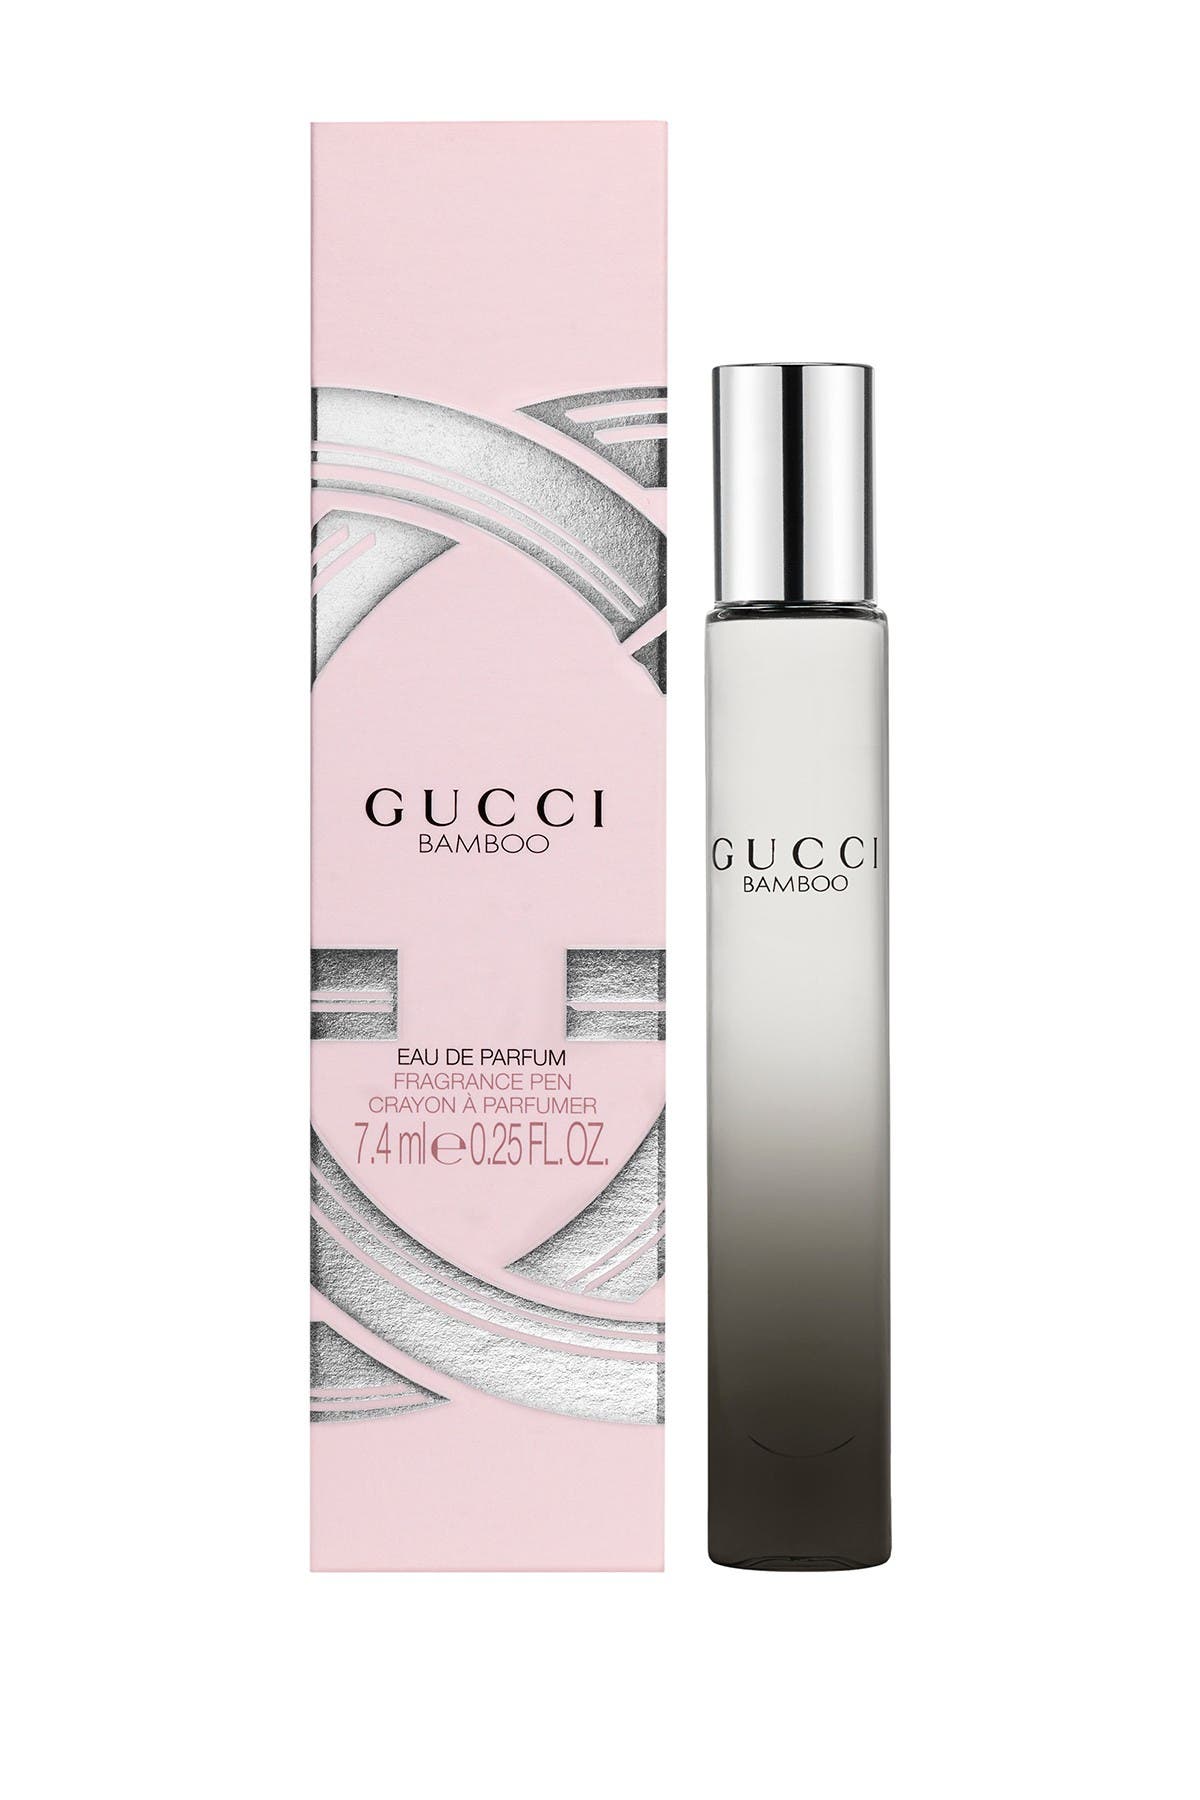 roll on gucci perfume